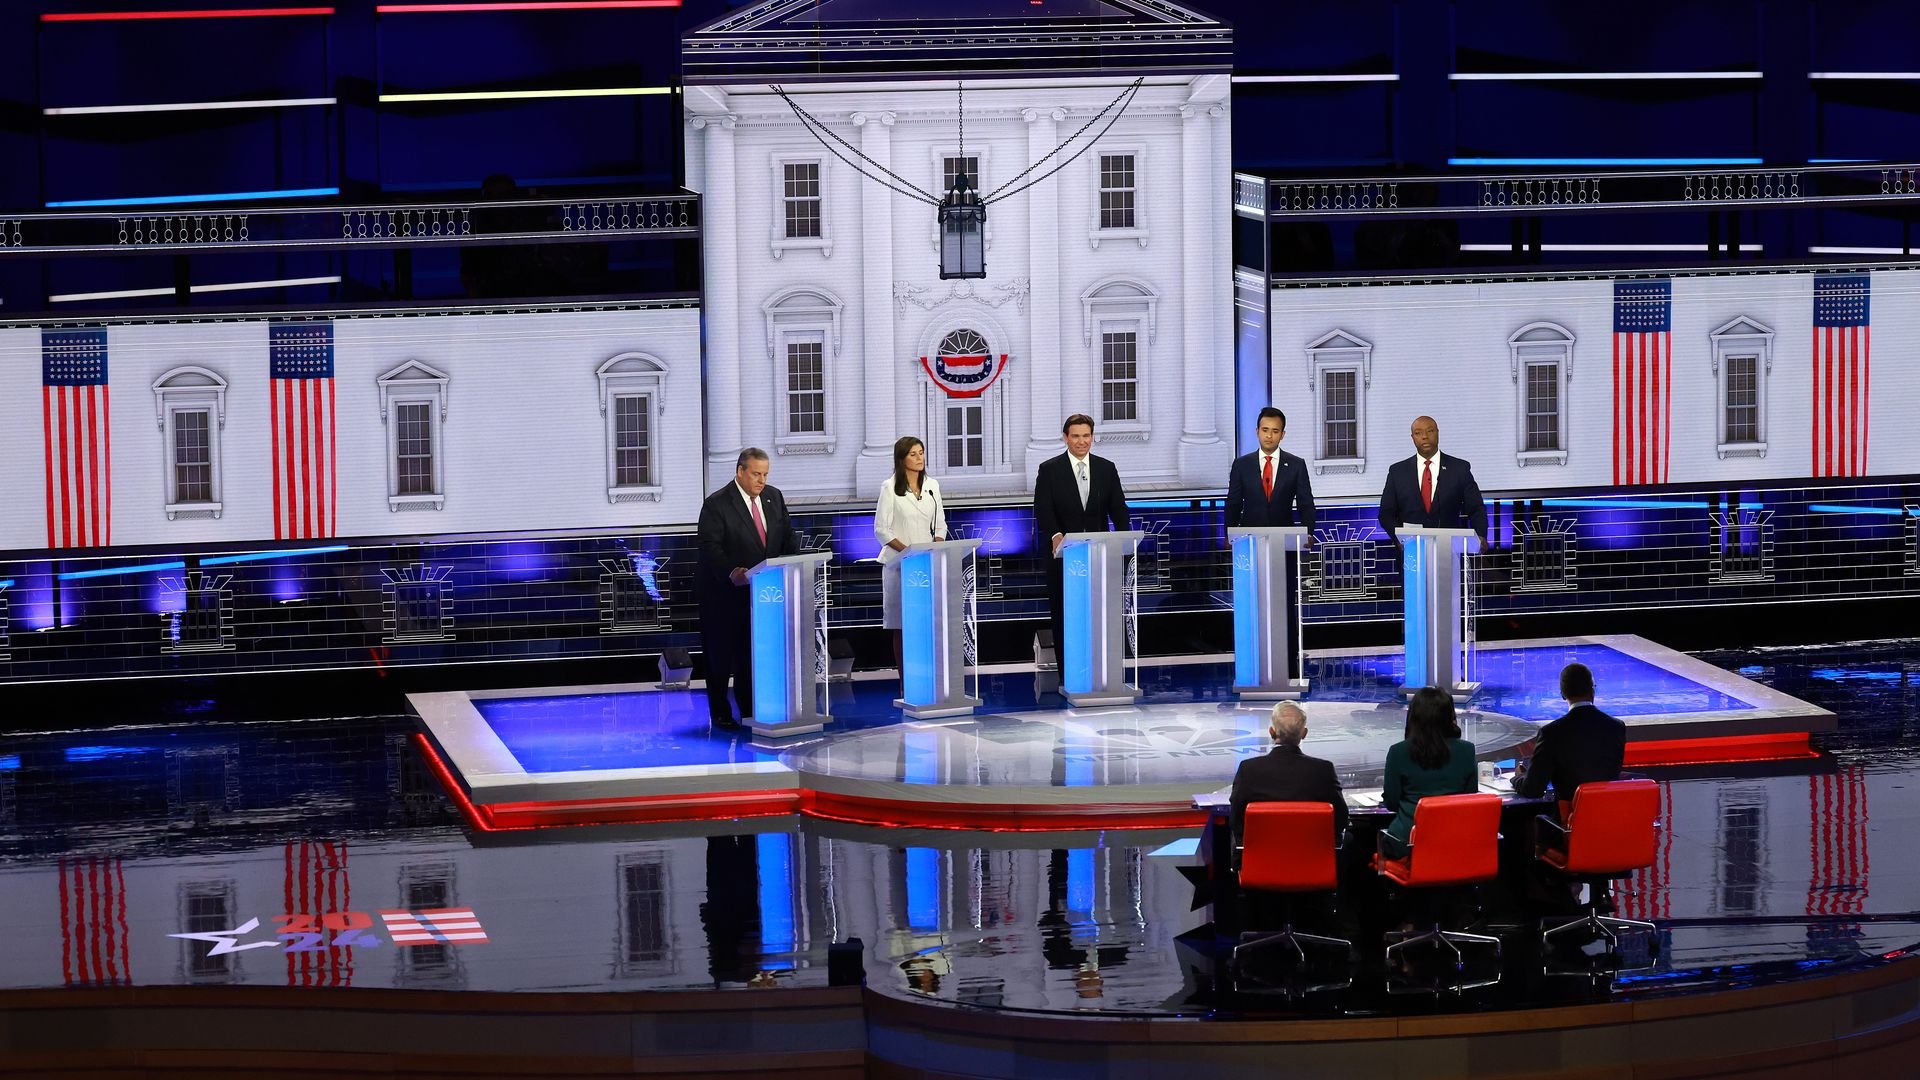 NewsNation to host fourth Republican primary debate next month